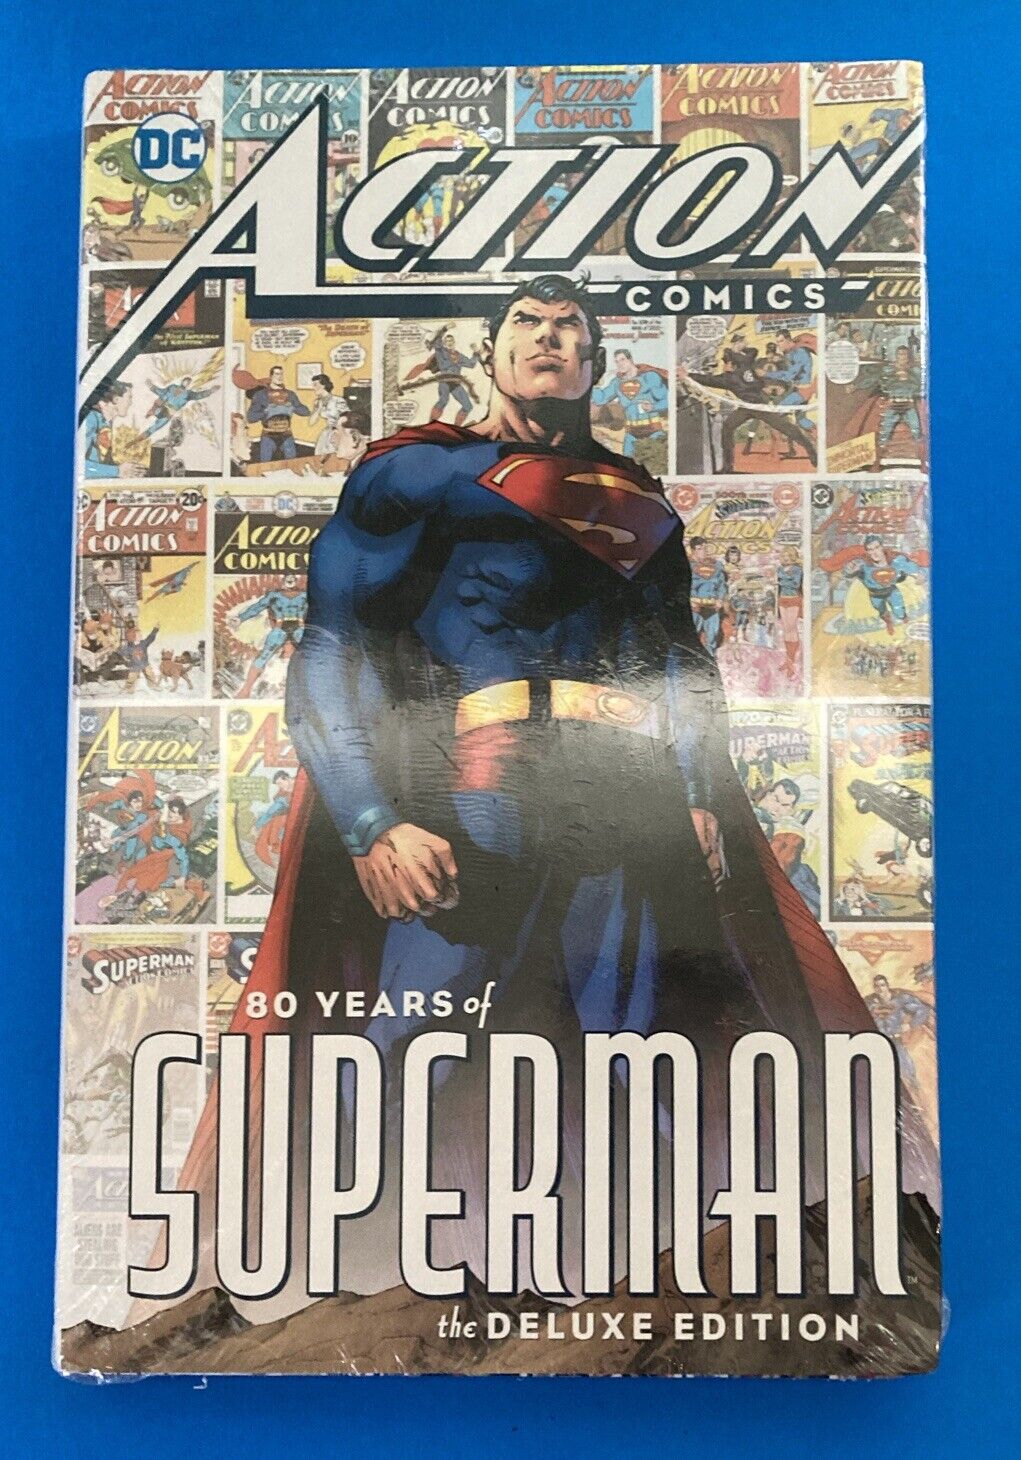 Action Comics 80 Years of Superman: the Deluxe Edition (DC Comics June 2018)